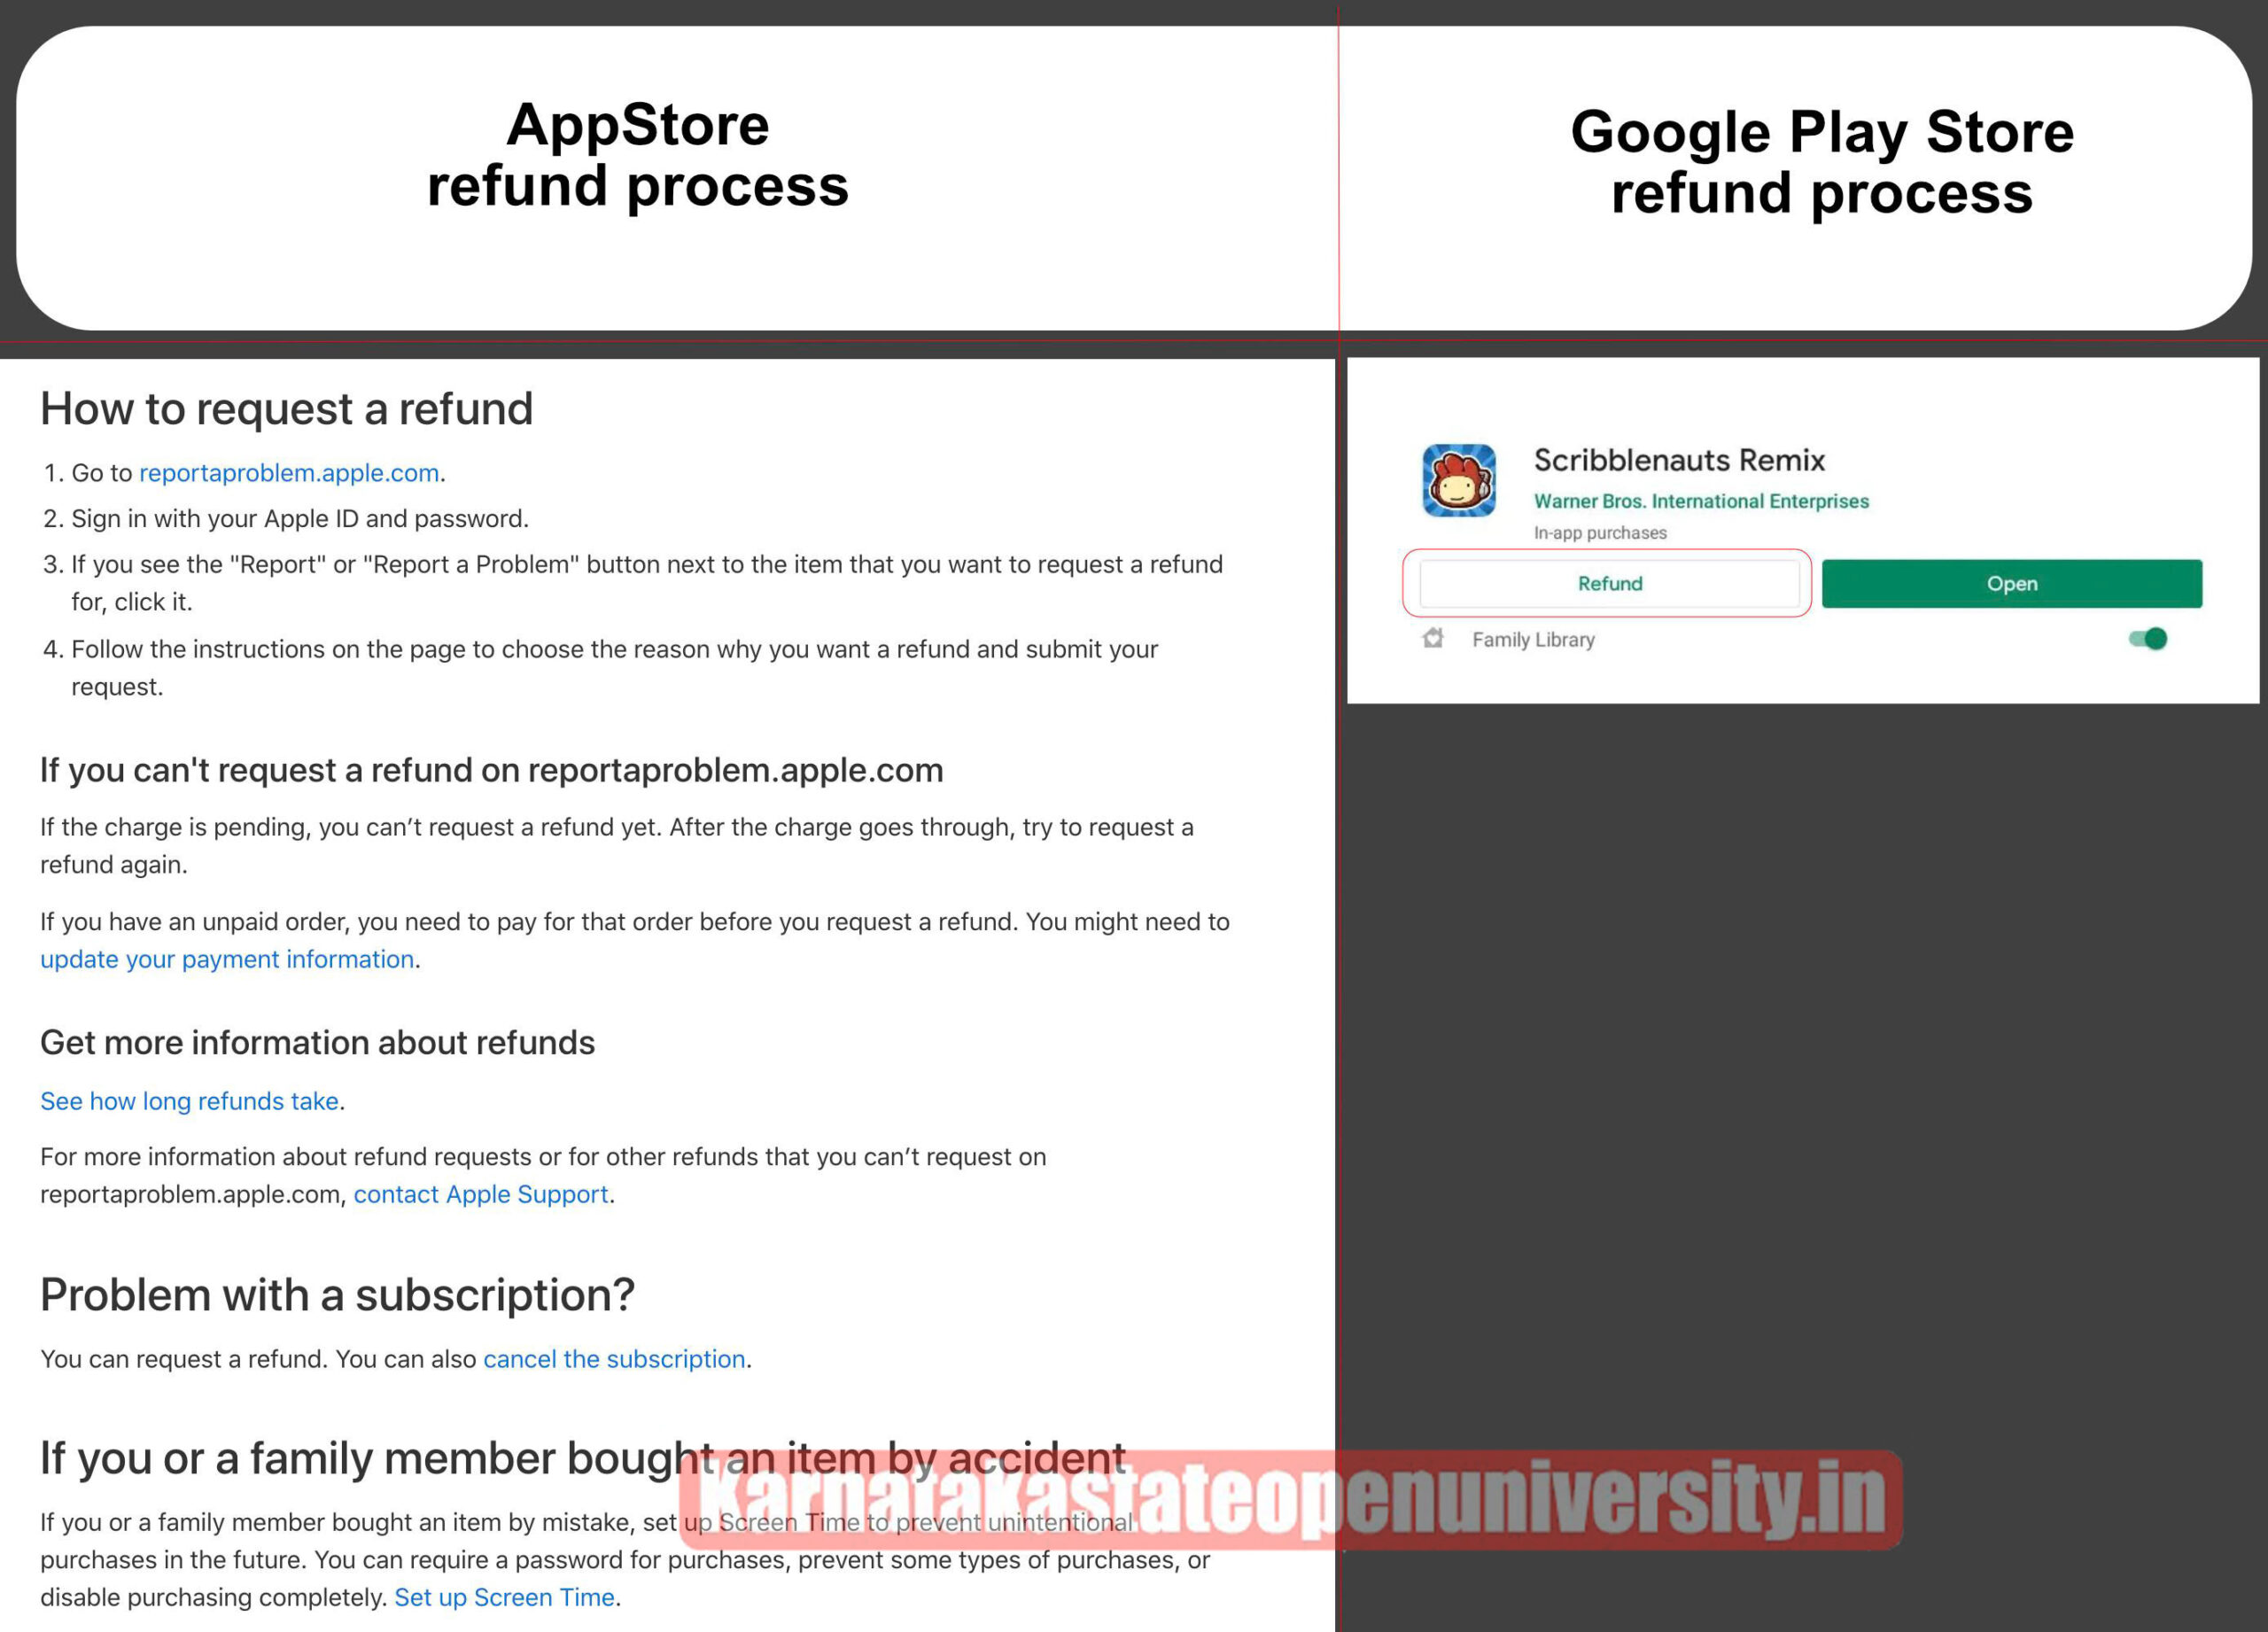 How to get a refund from the Google Play Store